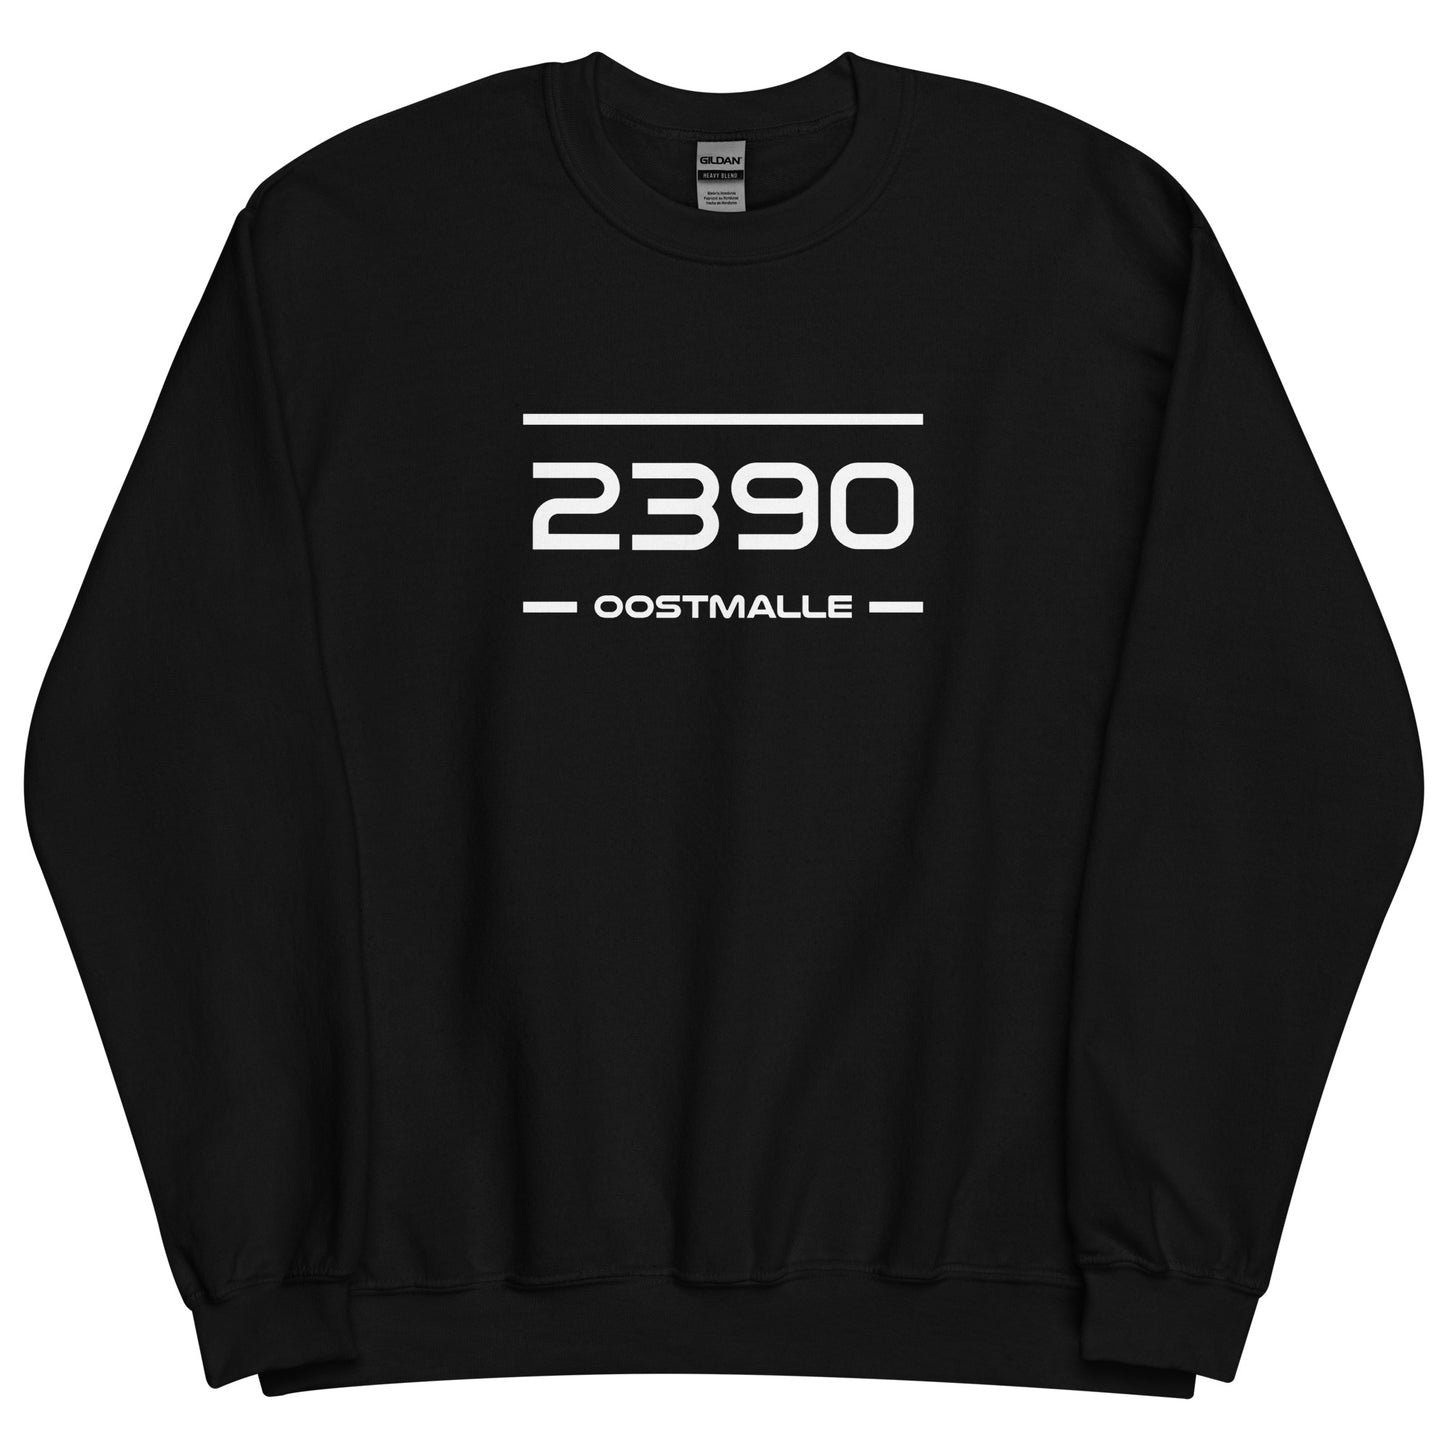 Sweater - 2390 - Oostmalle (M/V)